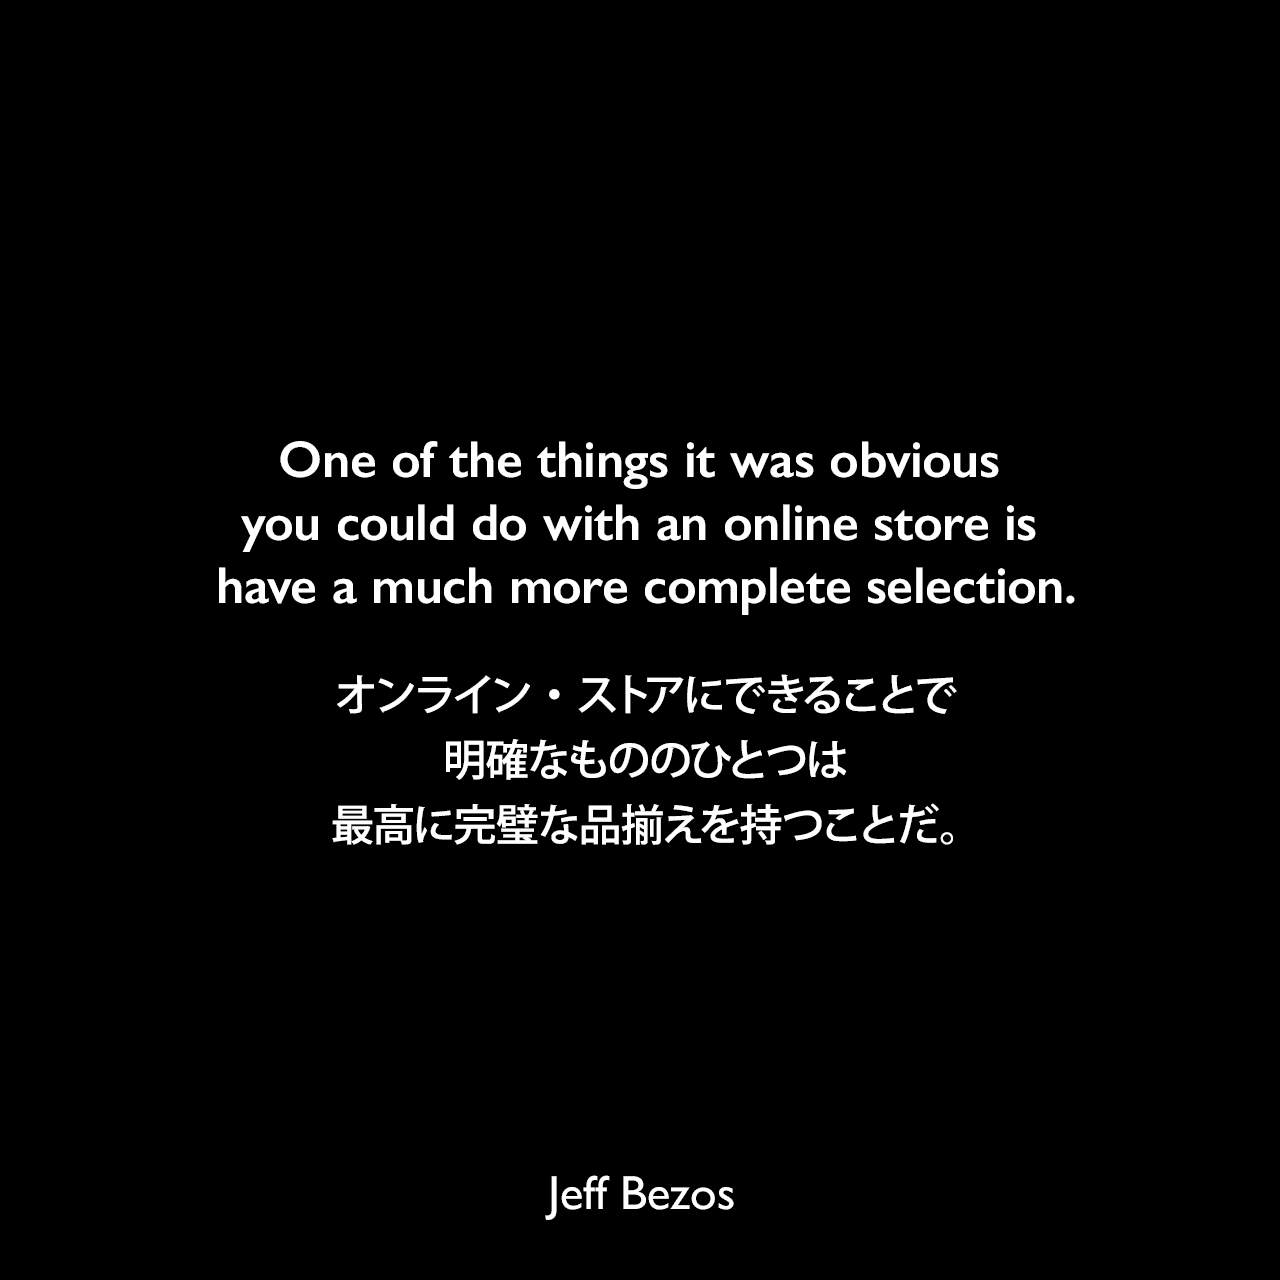 One of the things it was obvious you could do with an online store is have a much more complete selection.オンライン・ストアにできることで明確なもののひとつは、最高に完璧な品揃えを持つことだ。Jeff Bezos